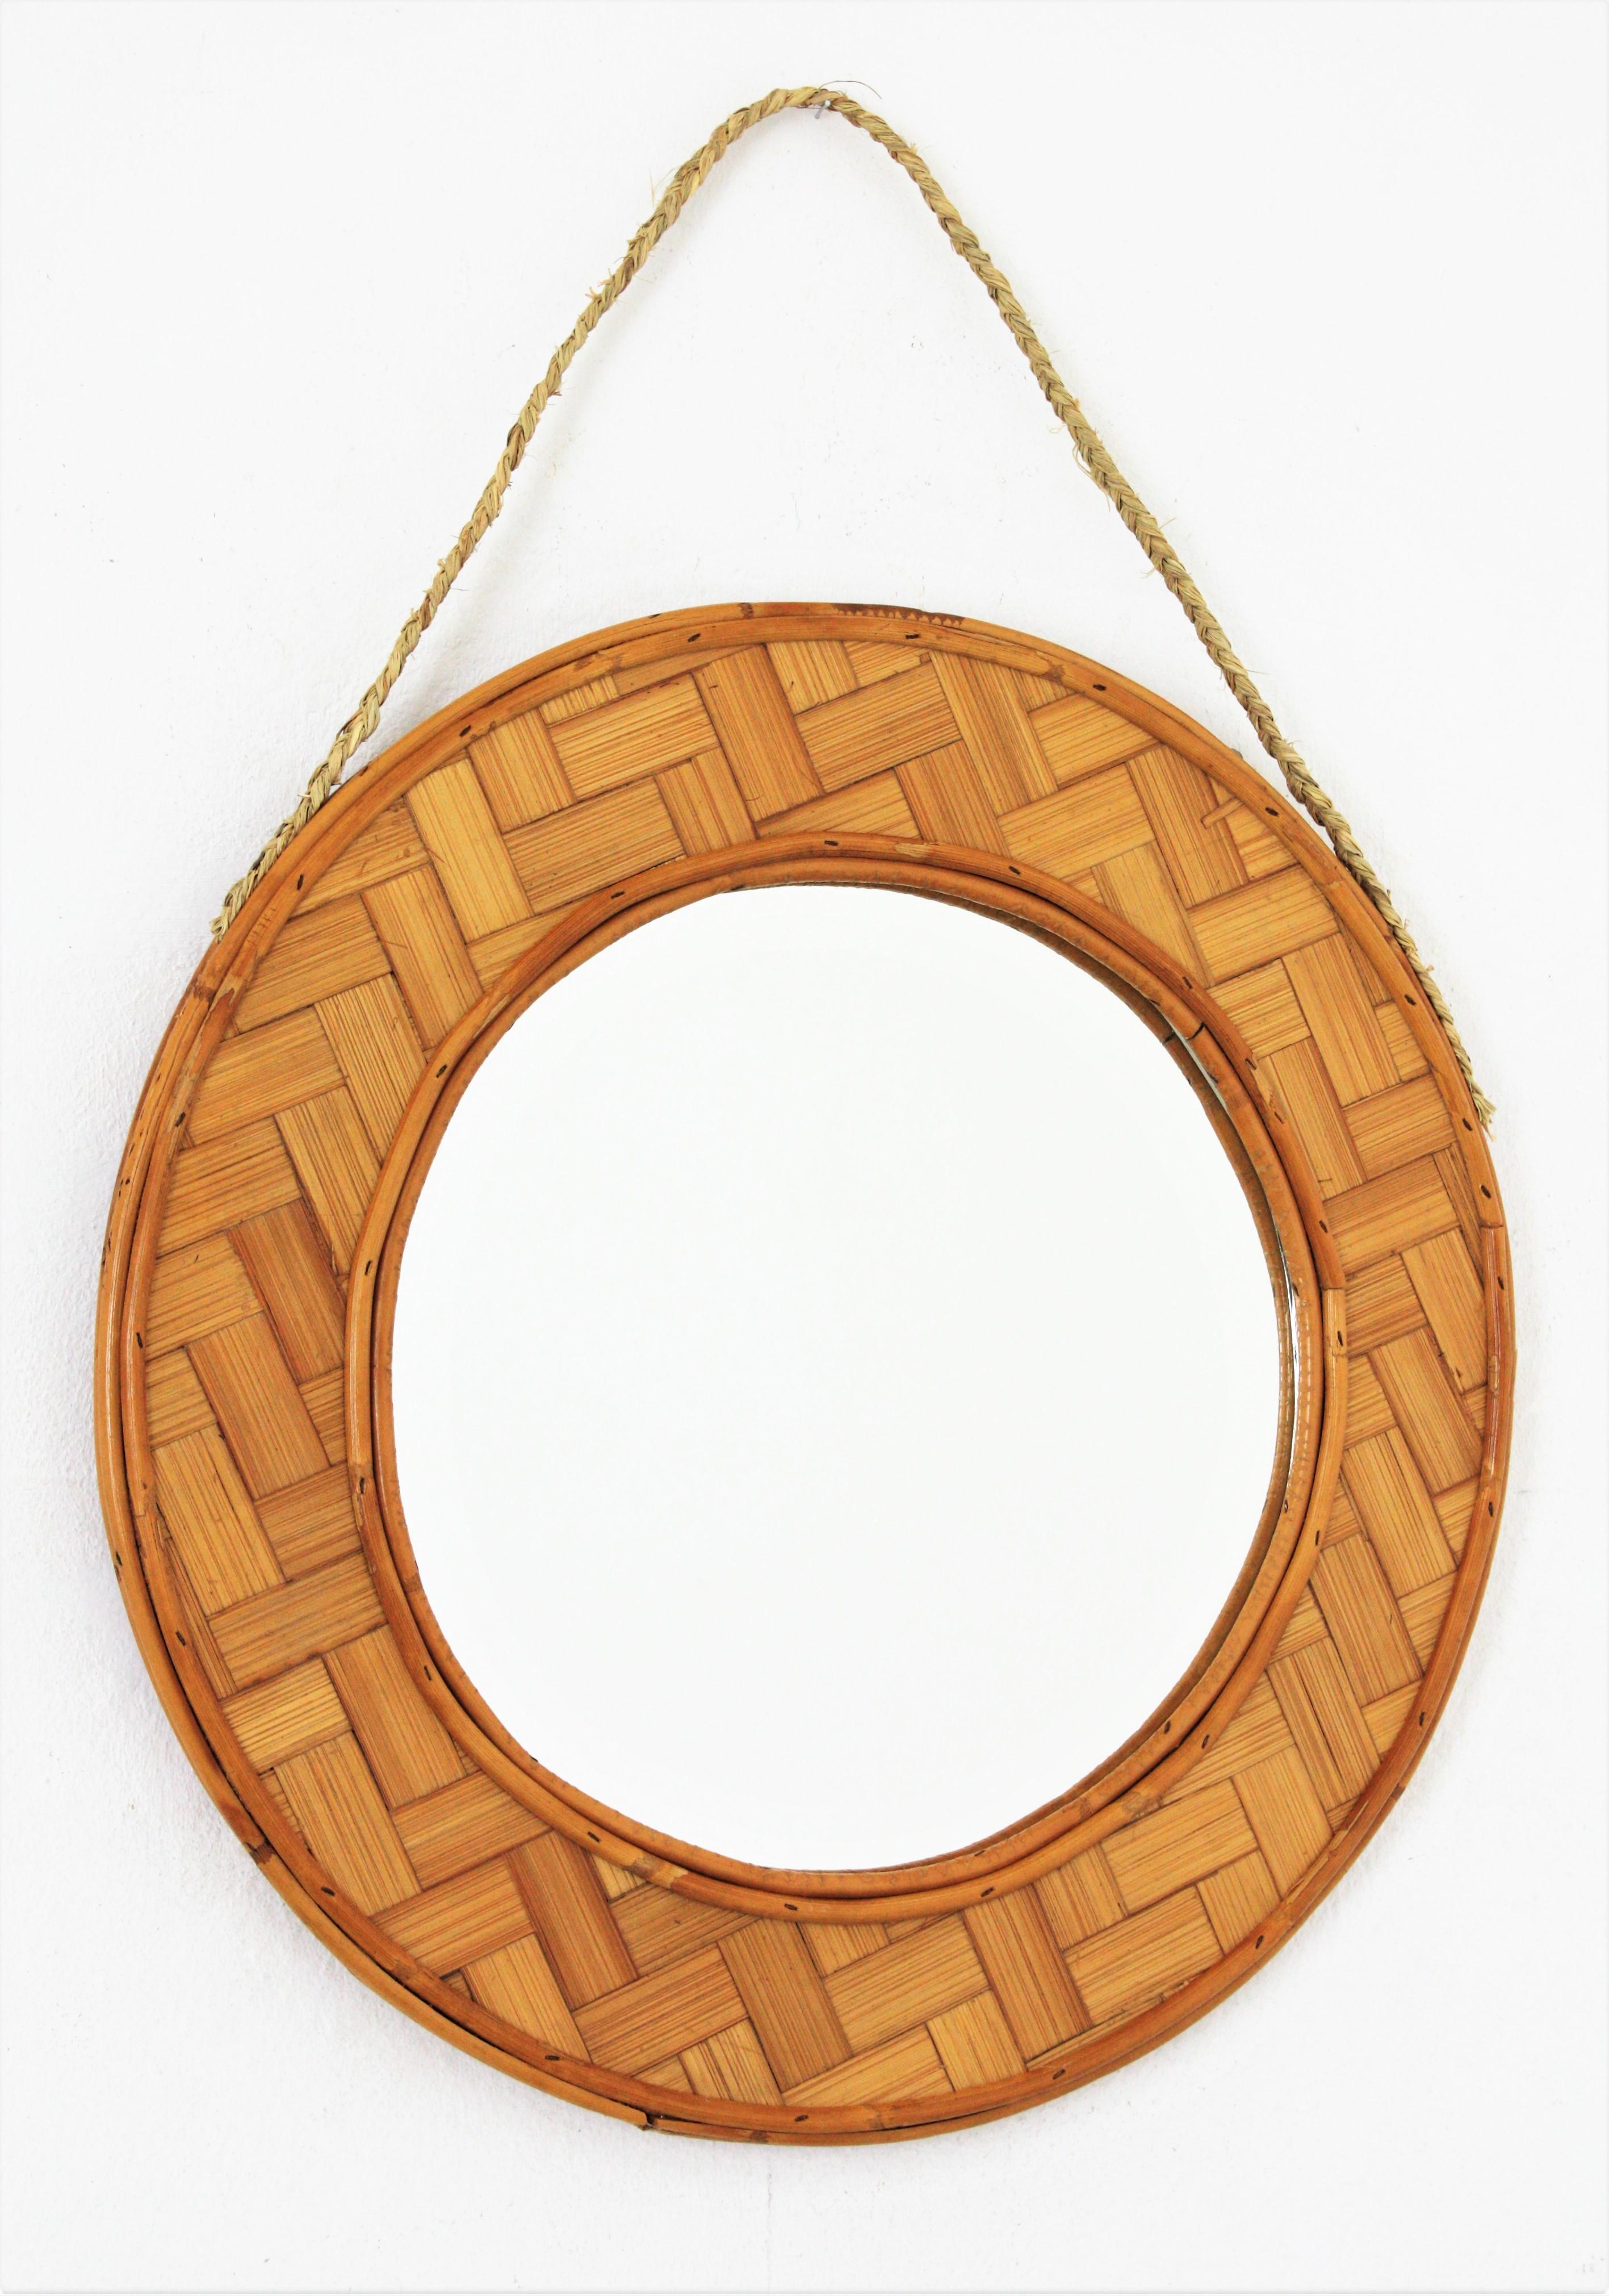 Spanish Tiki Style Woven Bamboo and Rattan Hanging Mirror, 1960s
Mid-Century Modern handcrafted braided bamboo leaf and rattan circular mirror hanging from an esparto rope. 
This lovely circular hanging mirror features a frame with an intrincate of